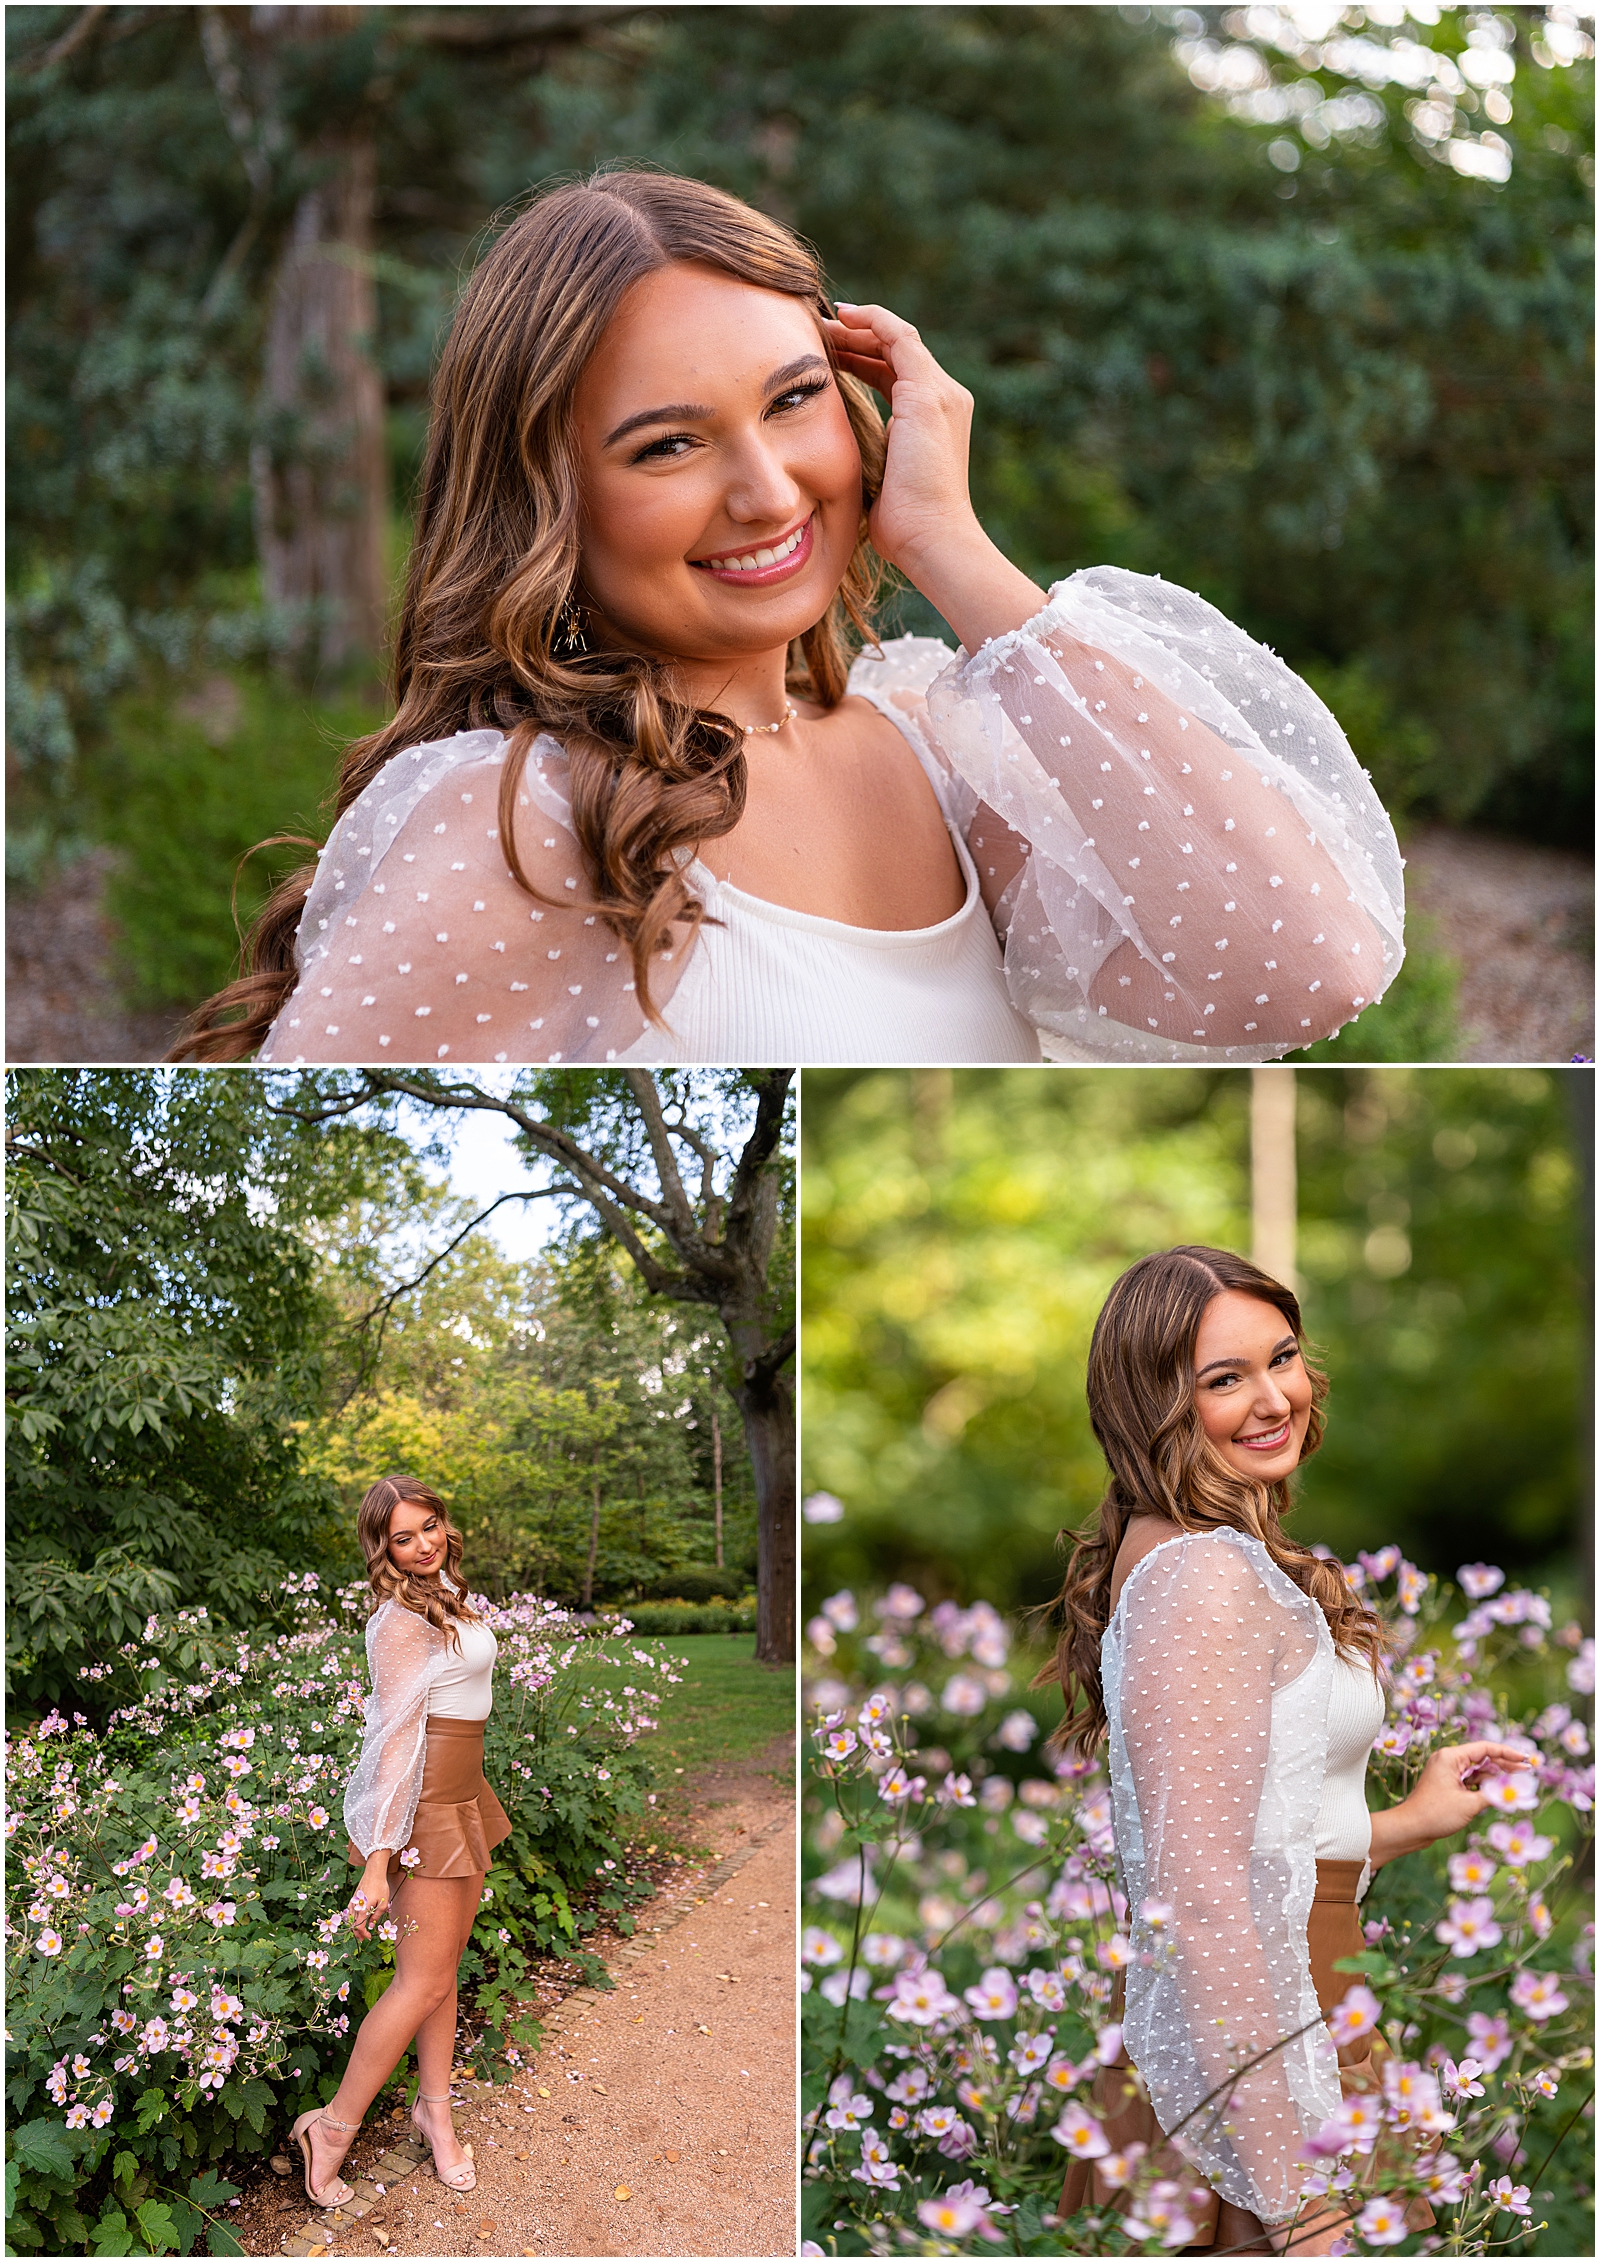 Booking Your Senior Portrait Session – senior girl wearing brown skirt and white bubble sleeve top in field of flowers – Sarah Jane Photography is a high school senior photographer serving Bourbonnais & Chicagoland.